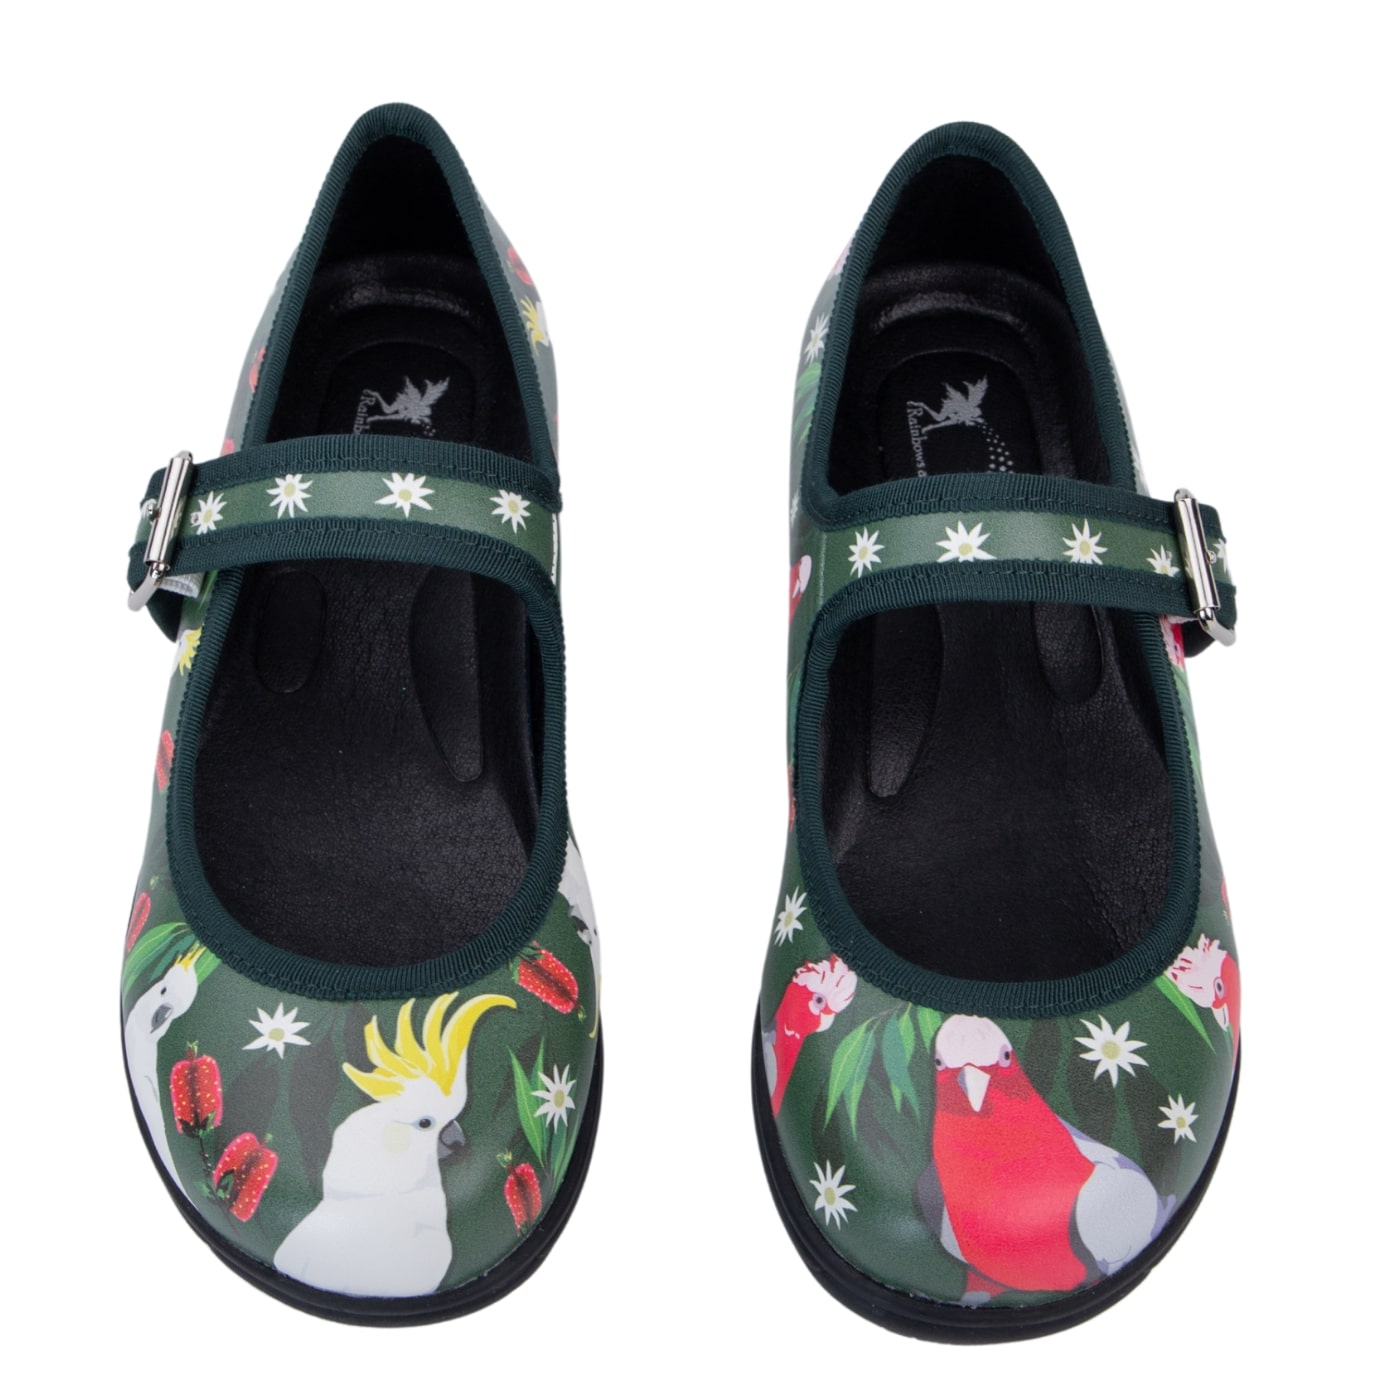 Polly Mary Janes by RainbowsAndFairies.com.au (Cockatoo - Galah - Mismatched Shoes - Cute & Comfy - Buckle Up Shoes - Native Flowers - Australian) - SKU: FW_MARYJ_POLLY_ORG - Pic-02